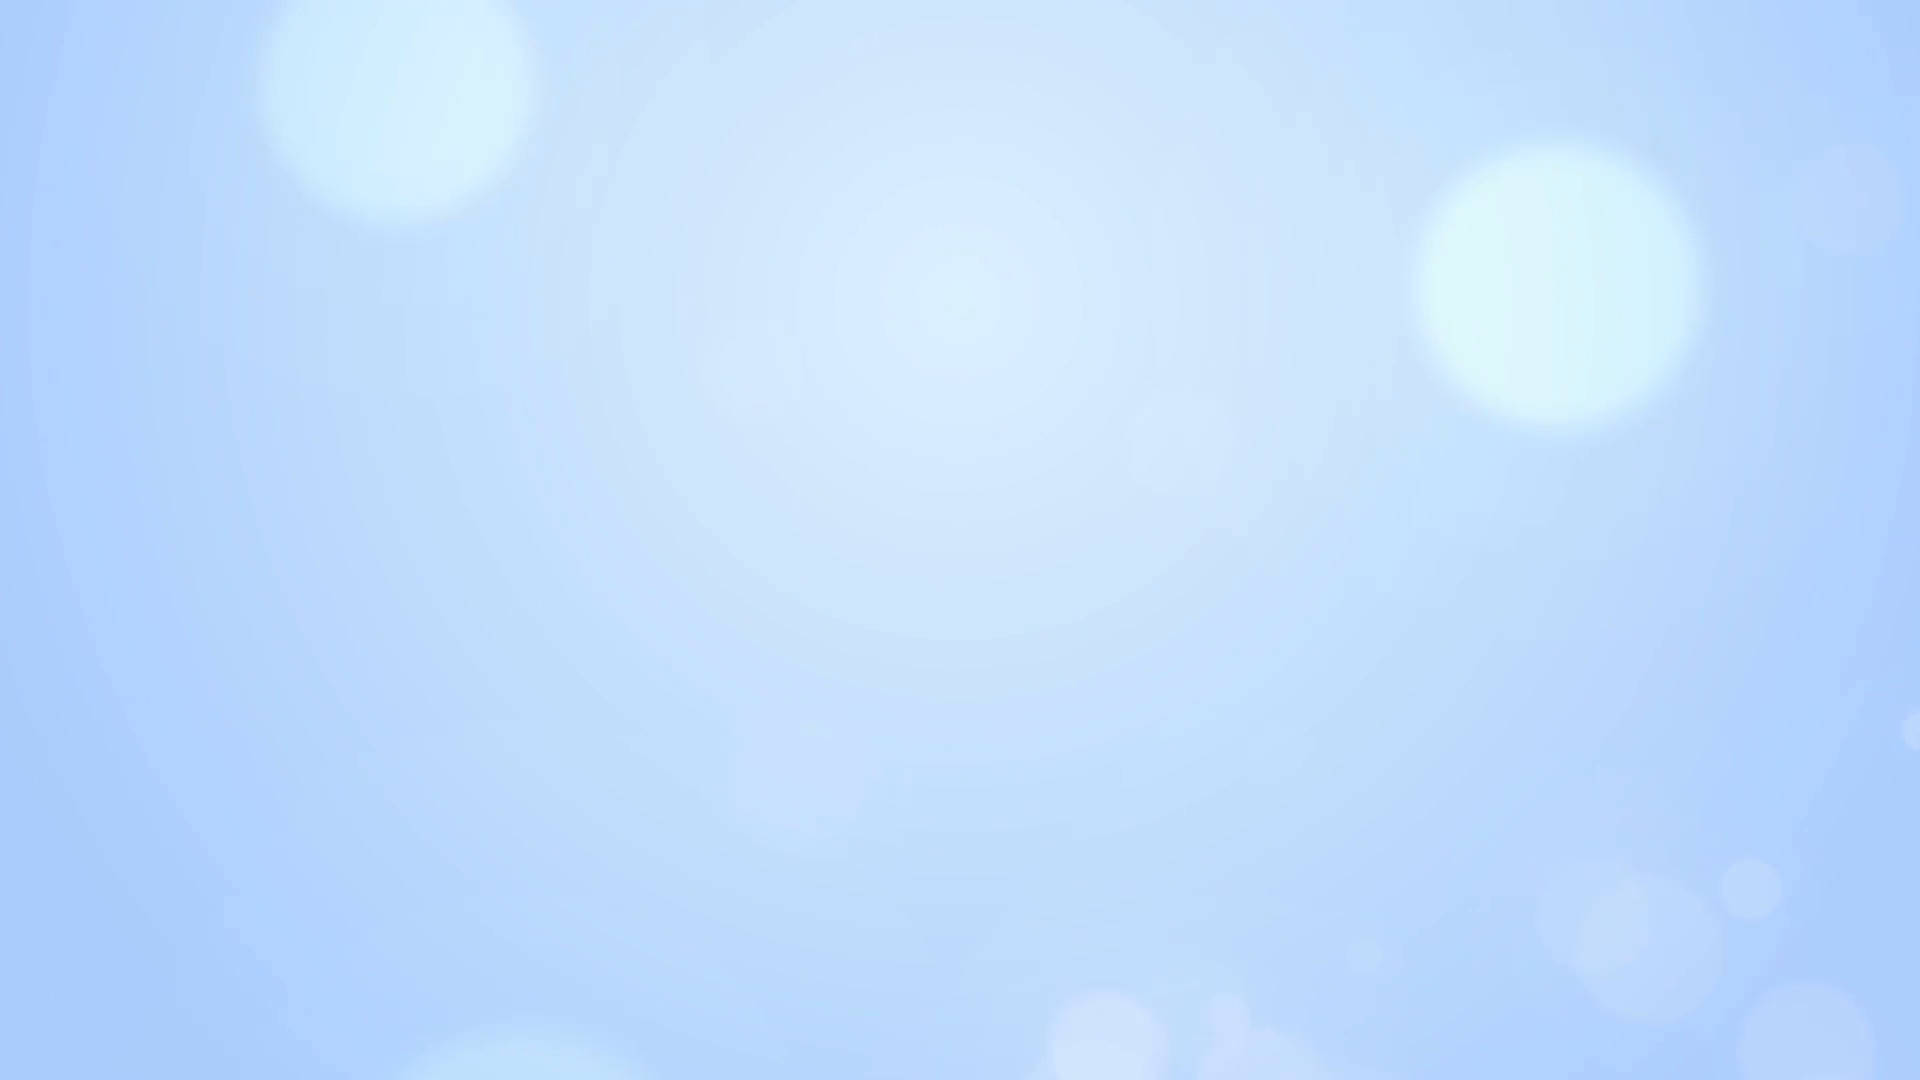 Light Blue Texture With Circles Background